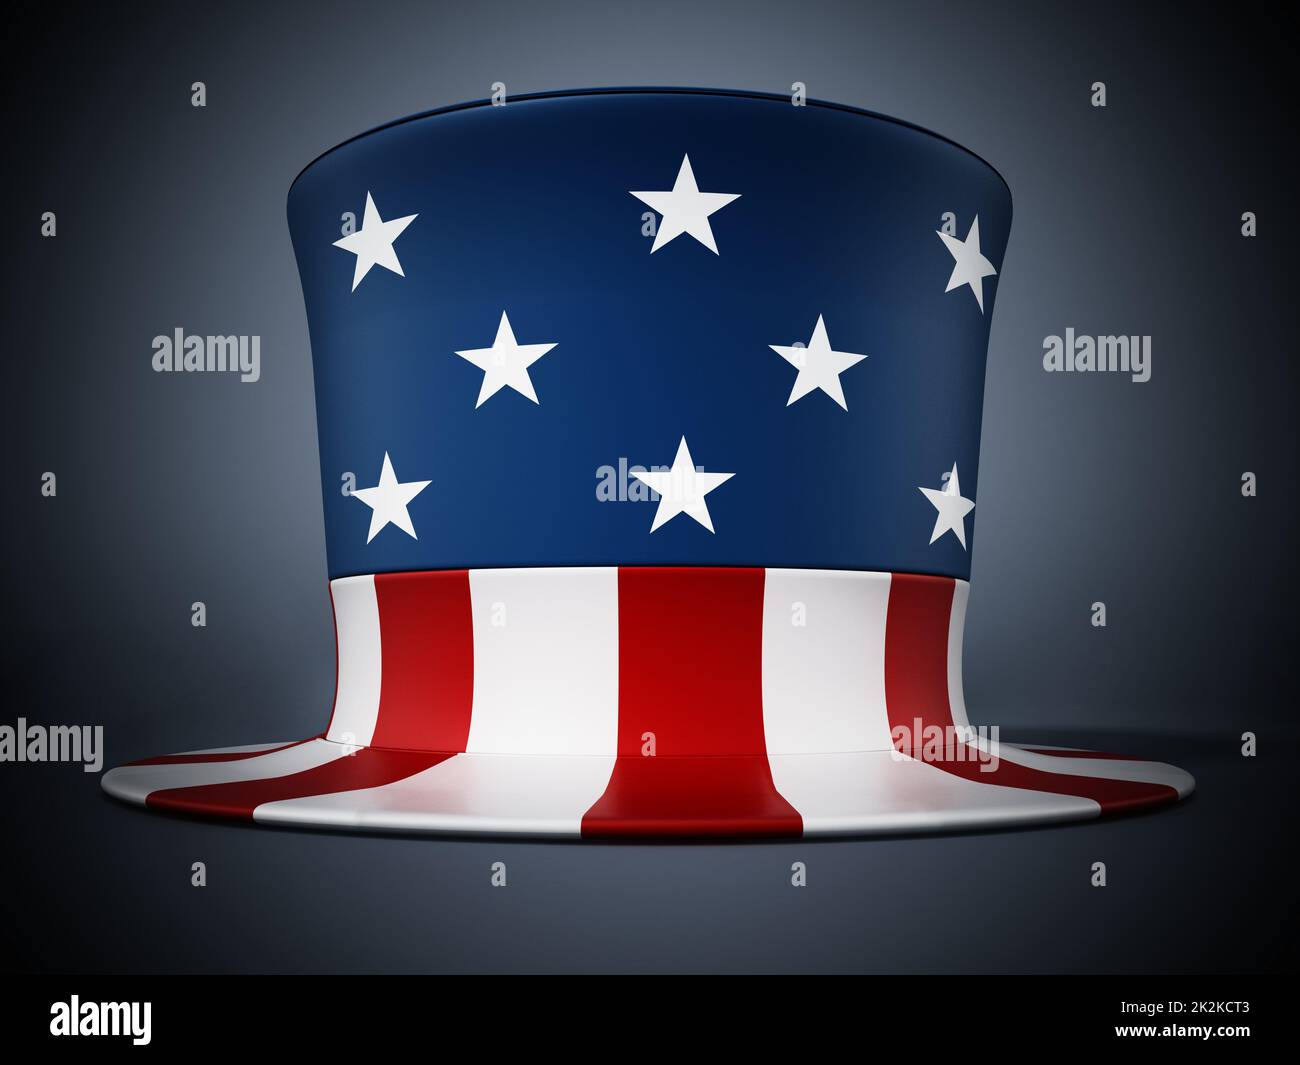 American flag textured hat isolated on dark background. 3D illustration Stock Photo